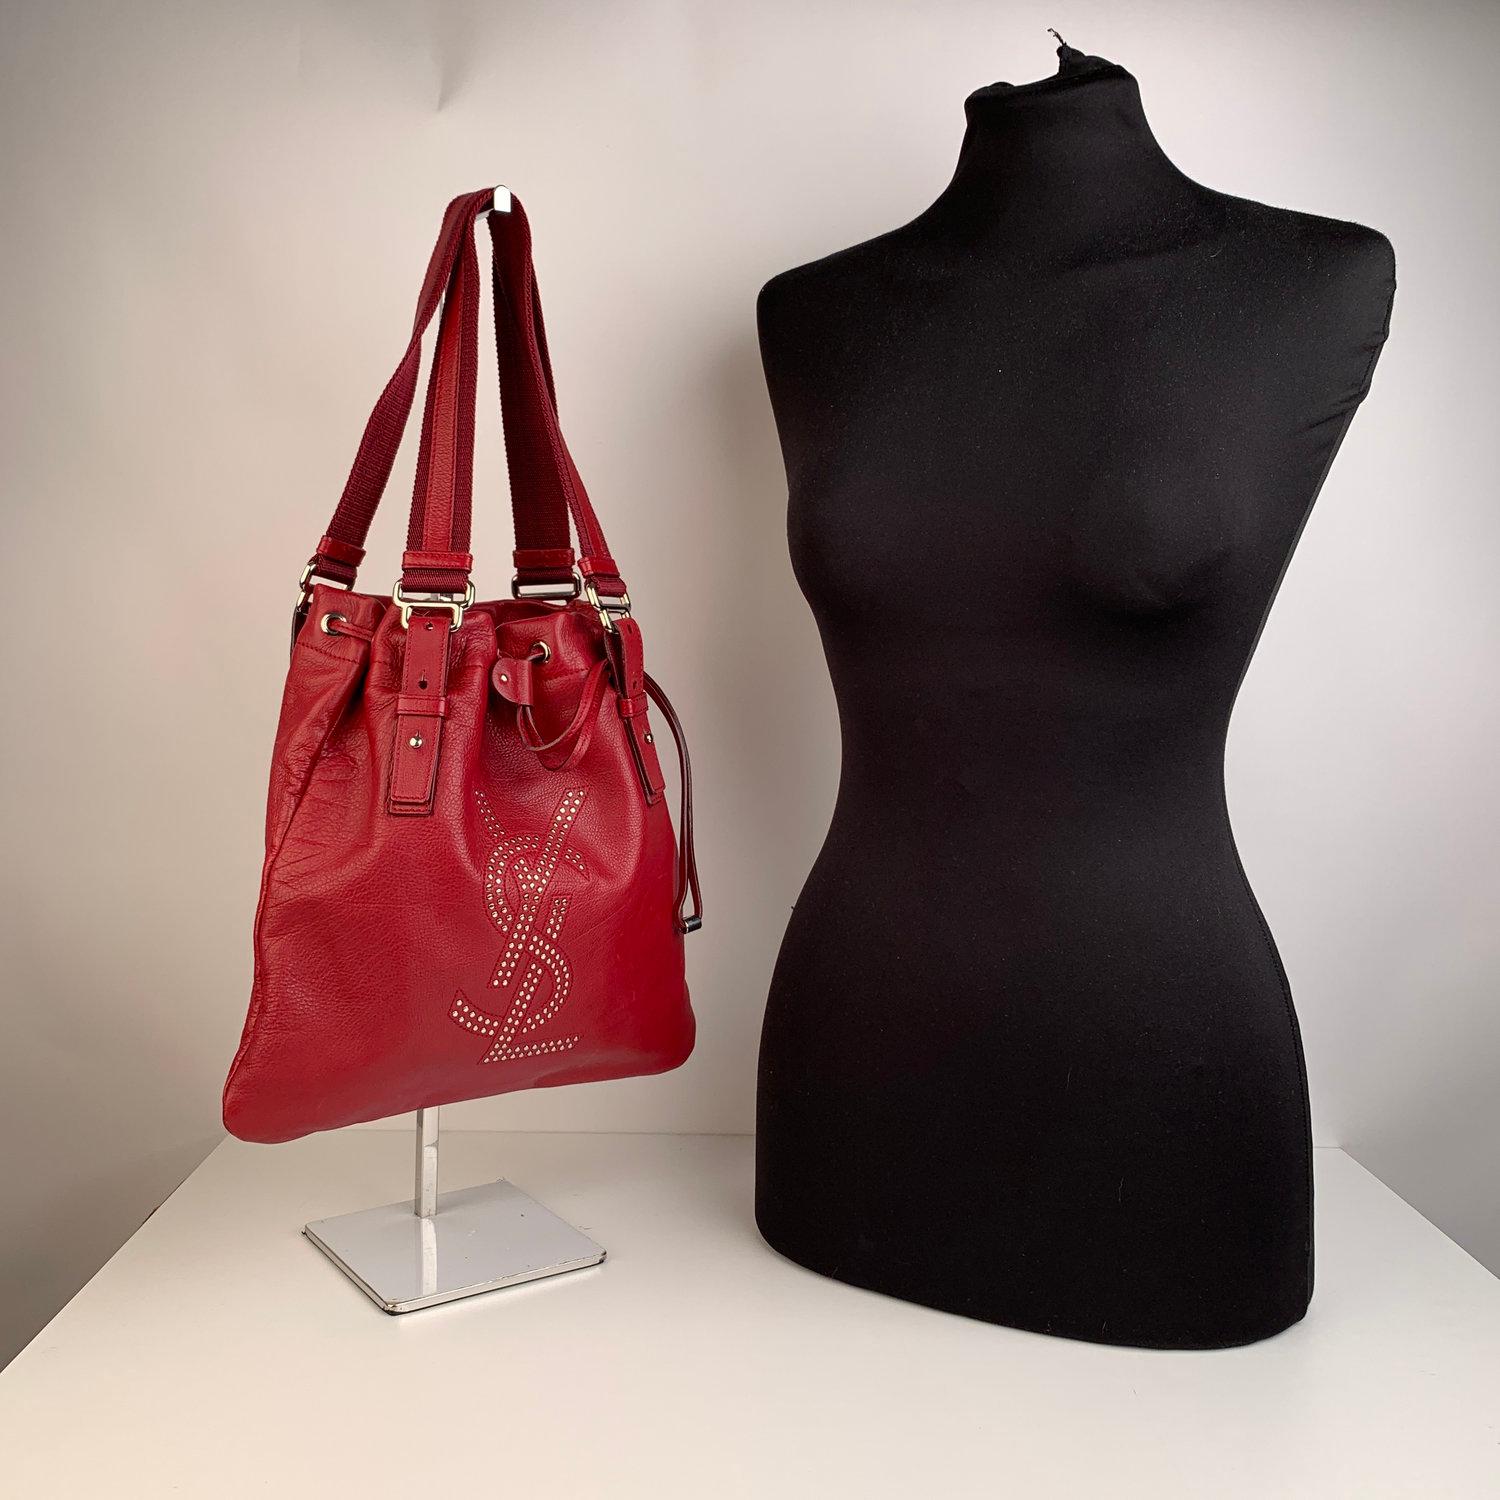 YVES SAINT LAURENT red leather 'Kahala Sac' tote bag, with silver metal studded YSL logo on the front. Drawstring closure on top. Double canvas and leather handles/straps. Black satin lining. 1 side zip pocket inside. 'YVES SAINT LAURENT Rive